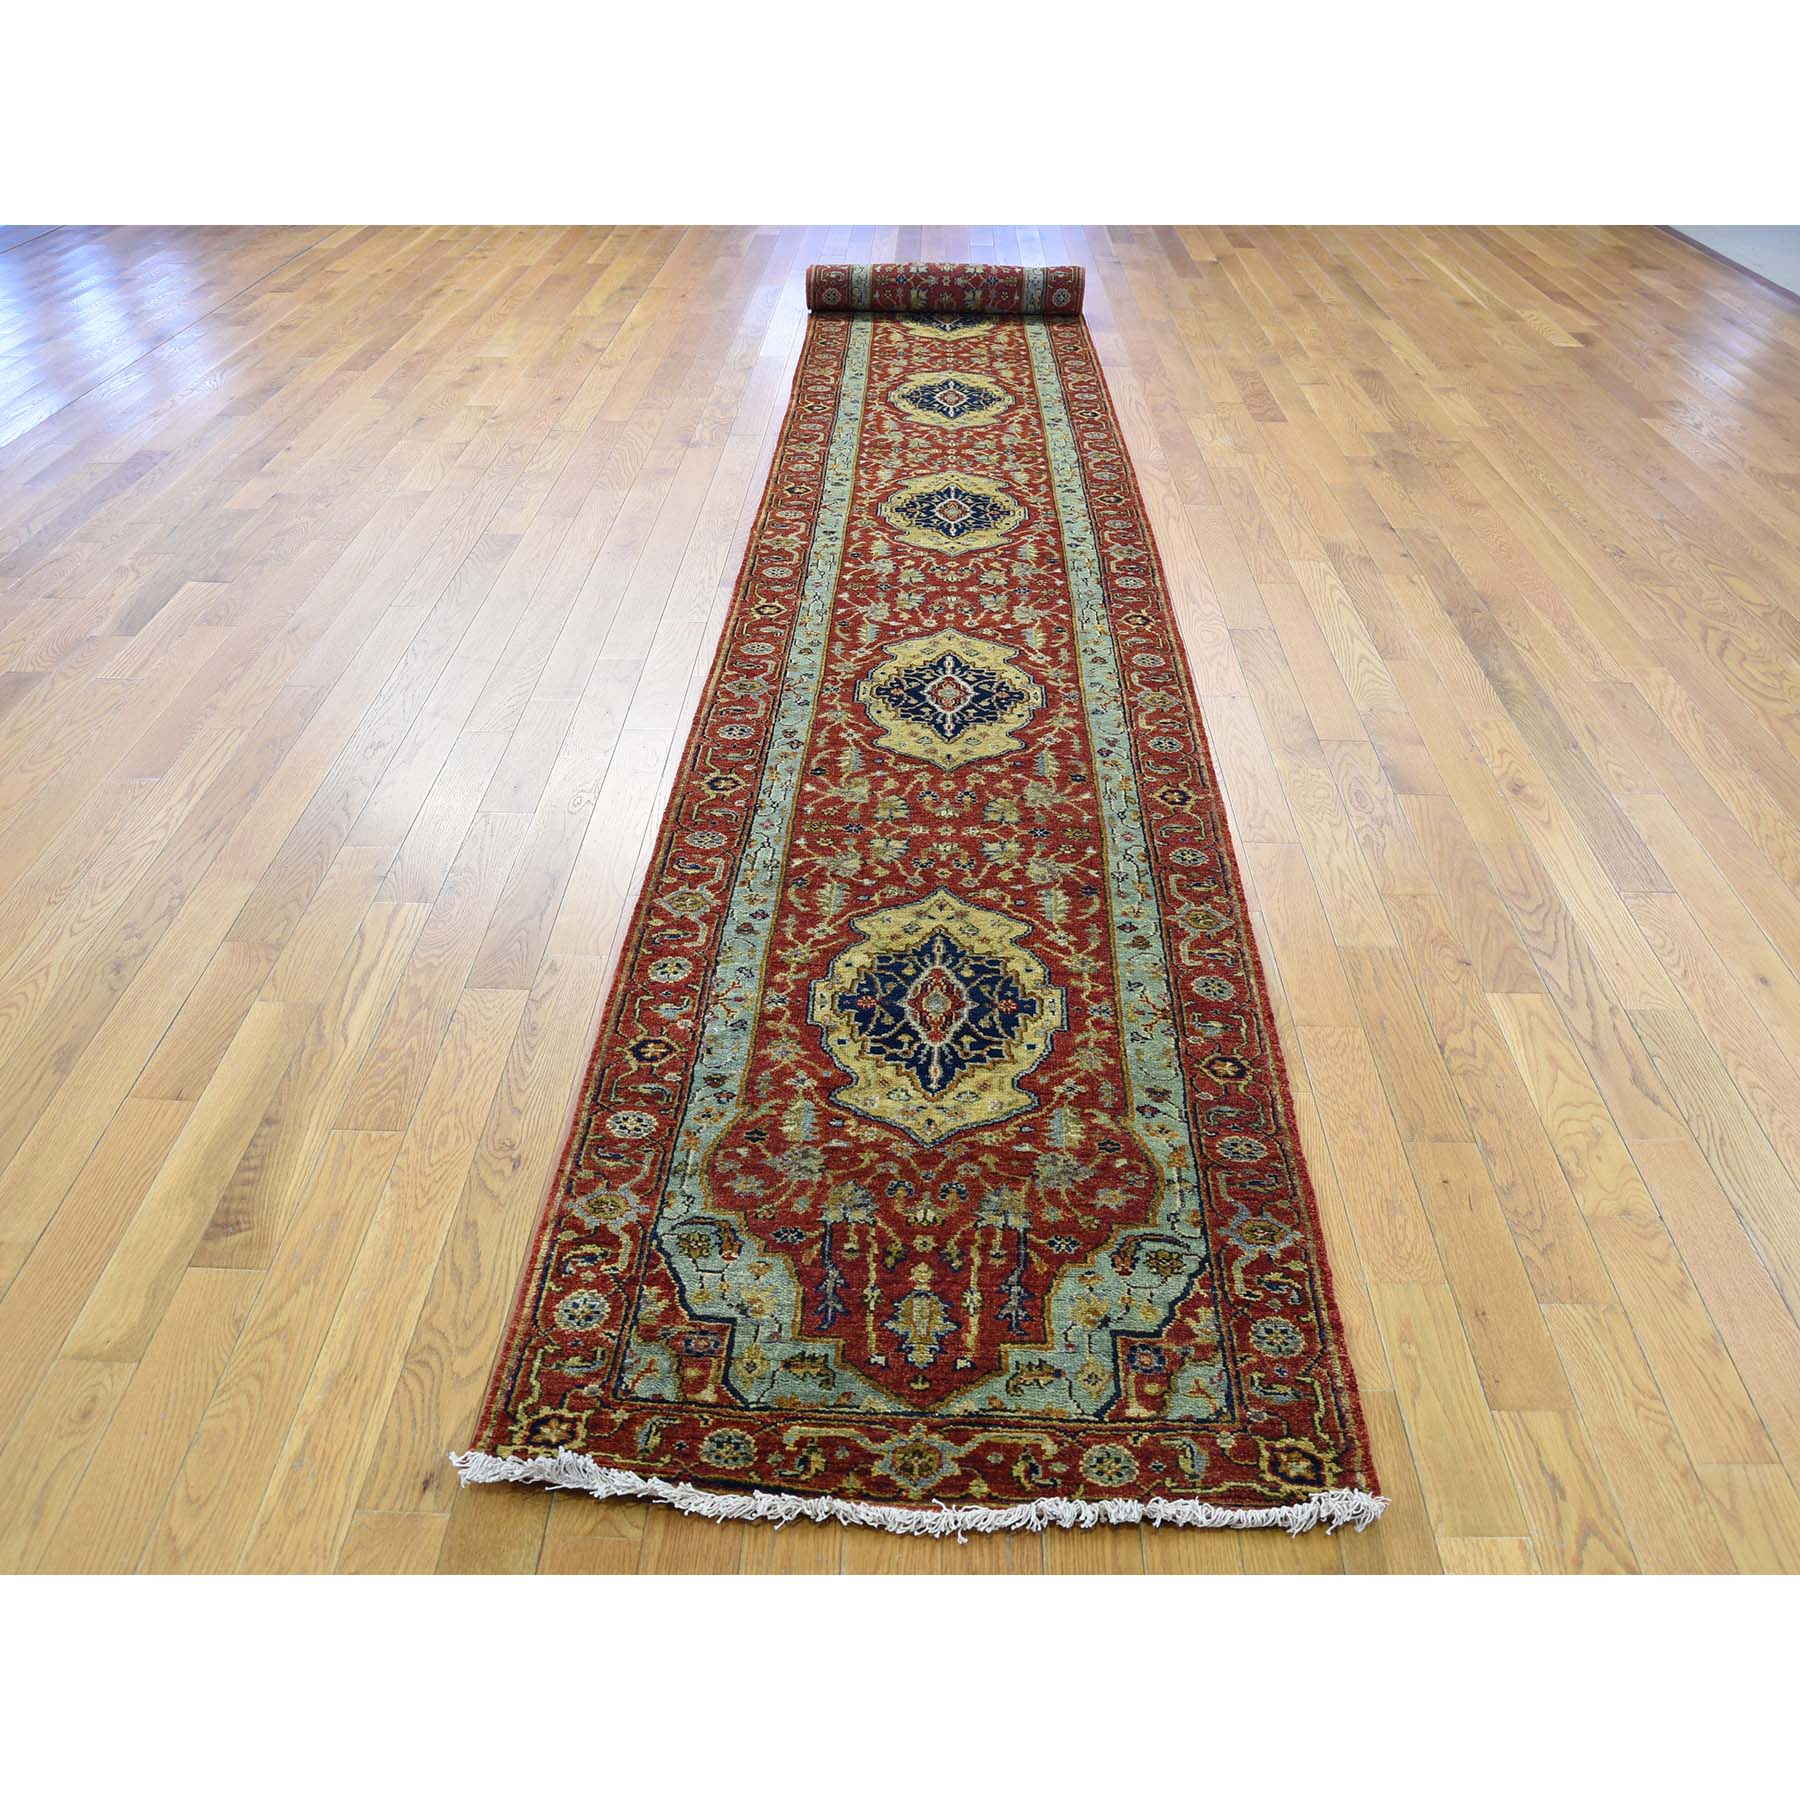 2-7 x17-7  Antiqued Heriz Re-Creation Pure Wool XL Runner Hand-Knotted Oriental Rug 